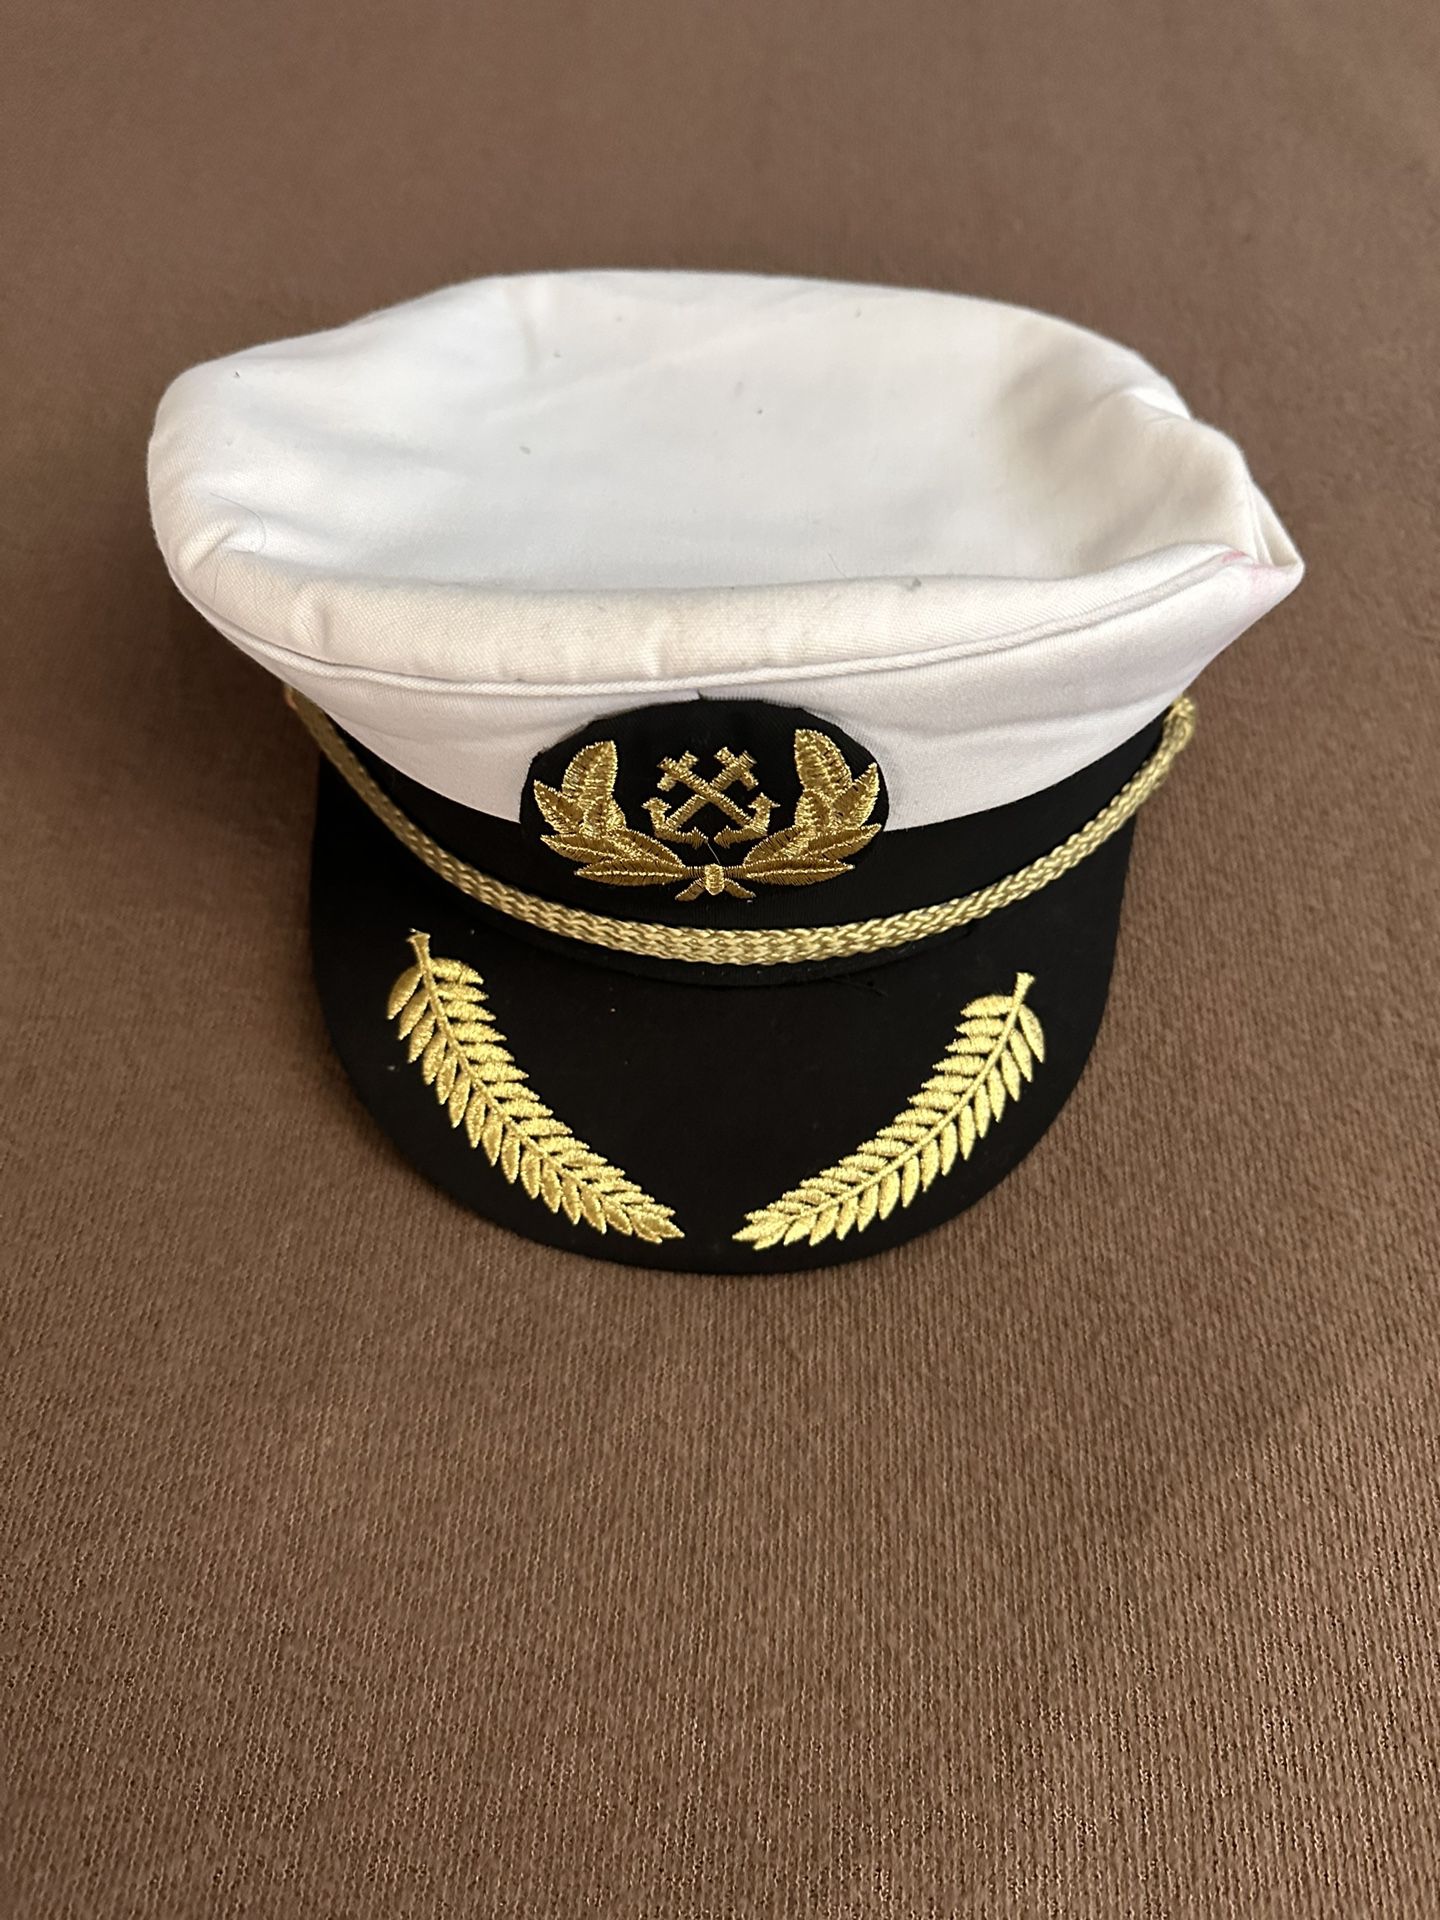 Cosplay Sailor Captains Hat